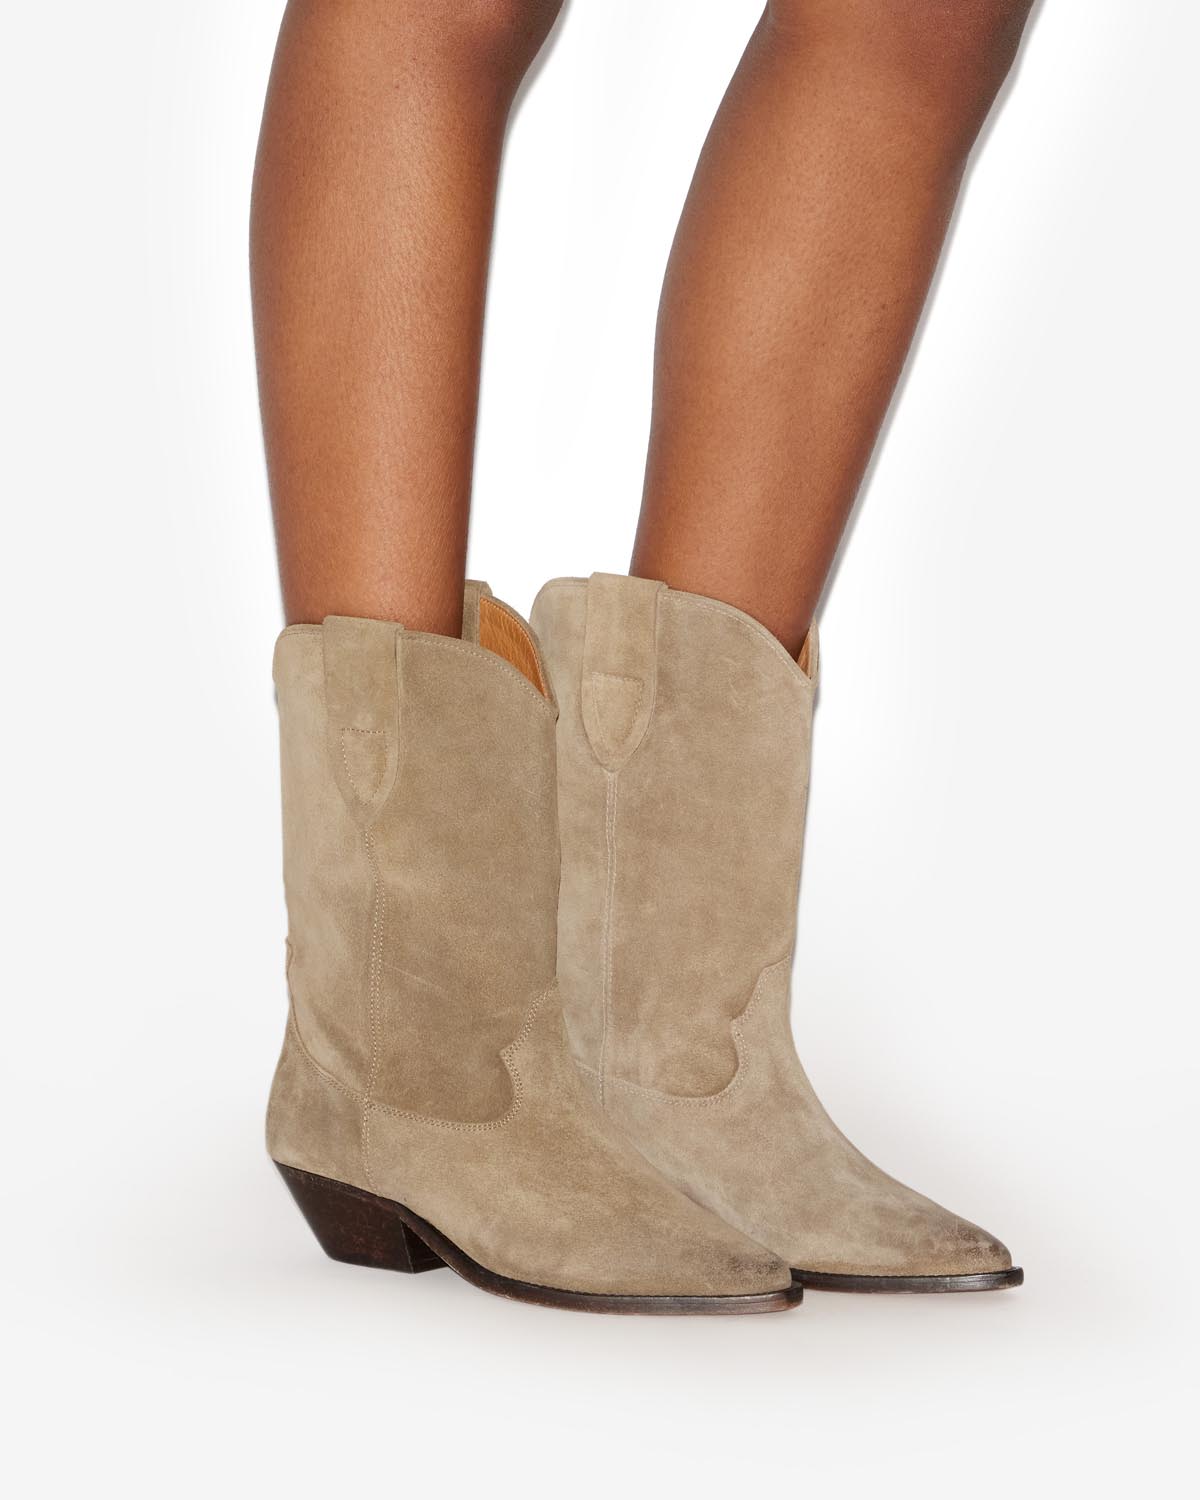 Stiefel duerto Woman Taupe 3